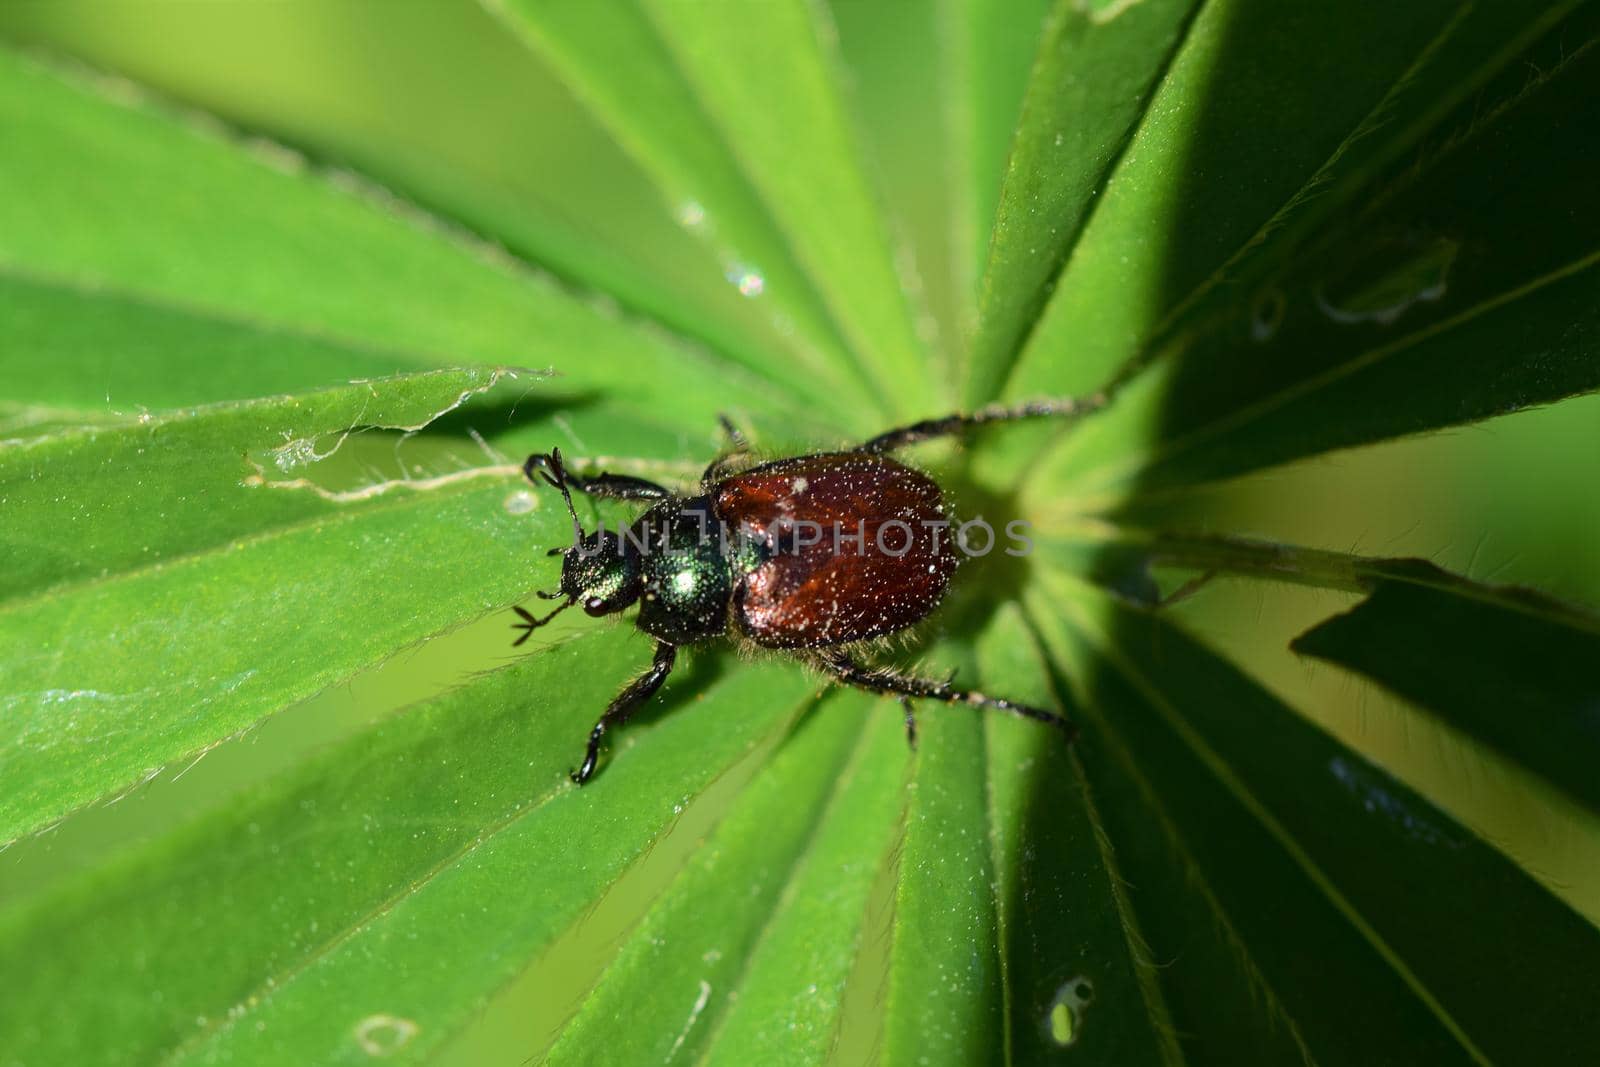 Garden foliage beetle - Phyllopertha horticola on a green leave by Luise123